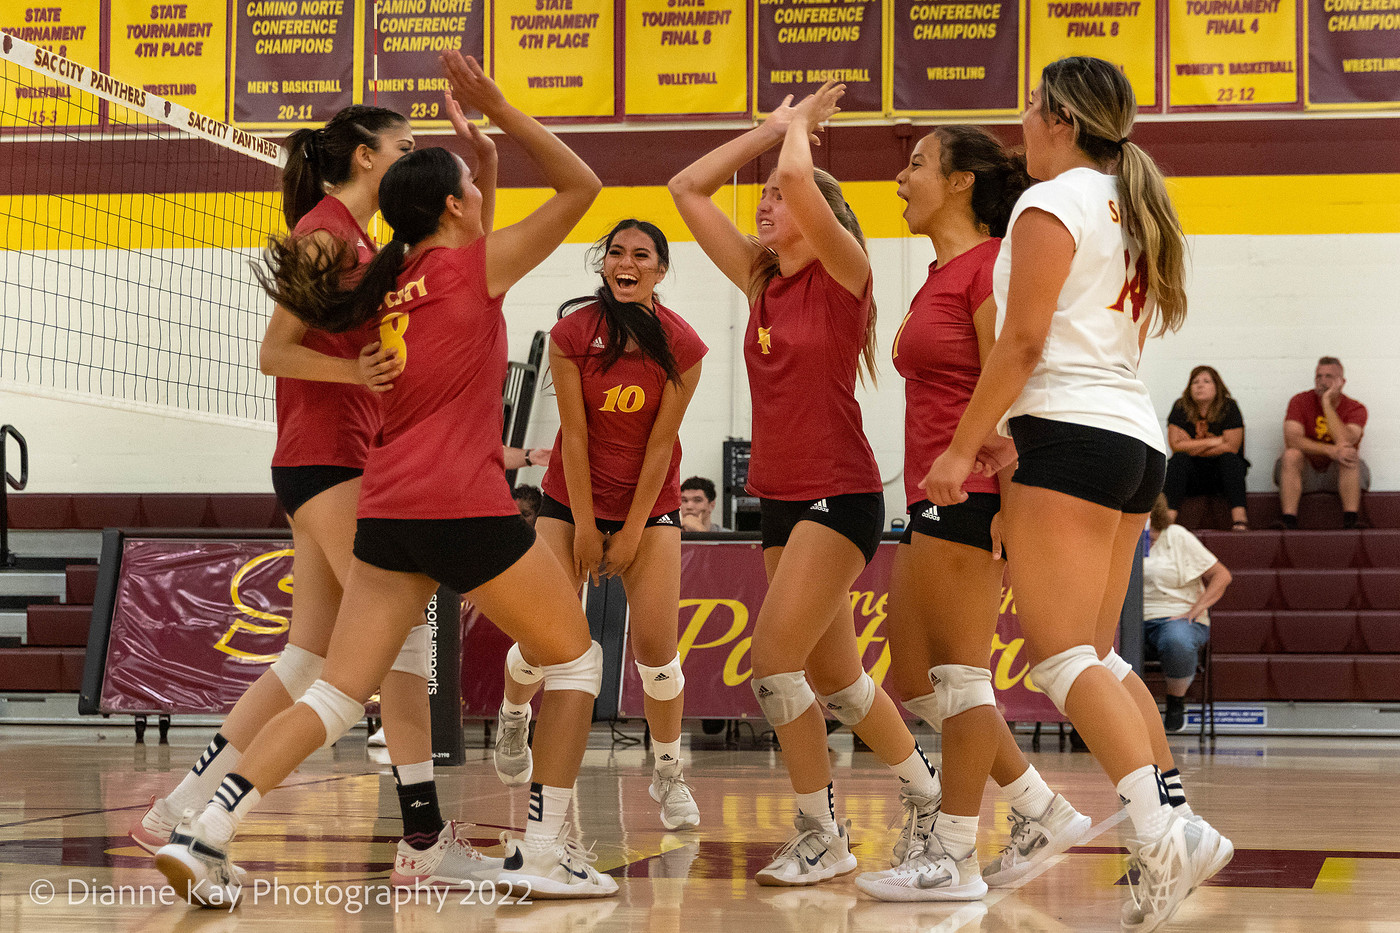 The Panthers beat the Hawks 3-0 (25-18, 25-18, 25-19); the win snaps SCC's losing streak and extends CRC's losing streak